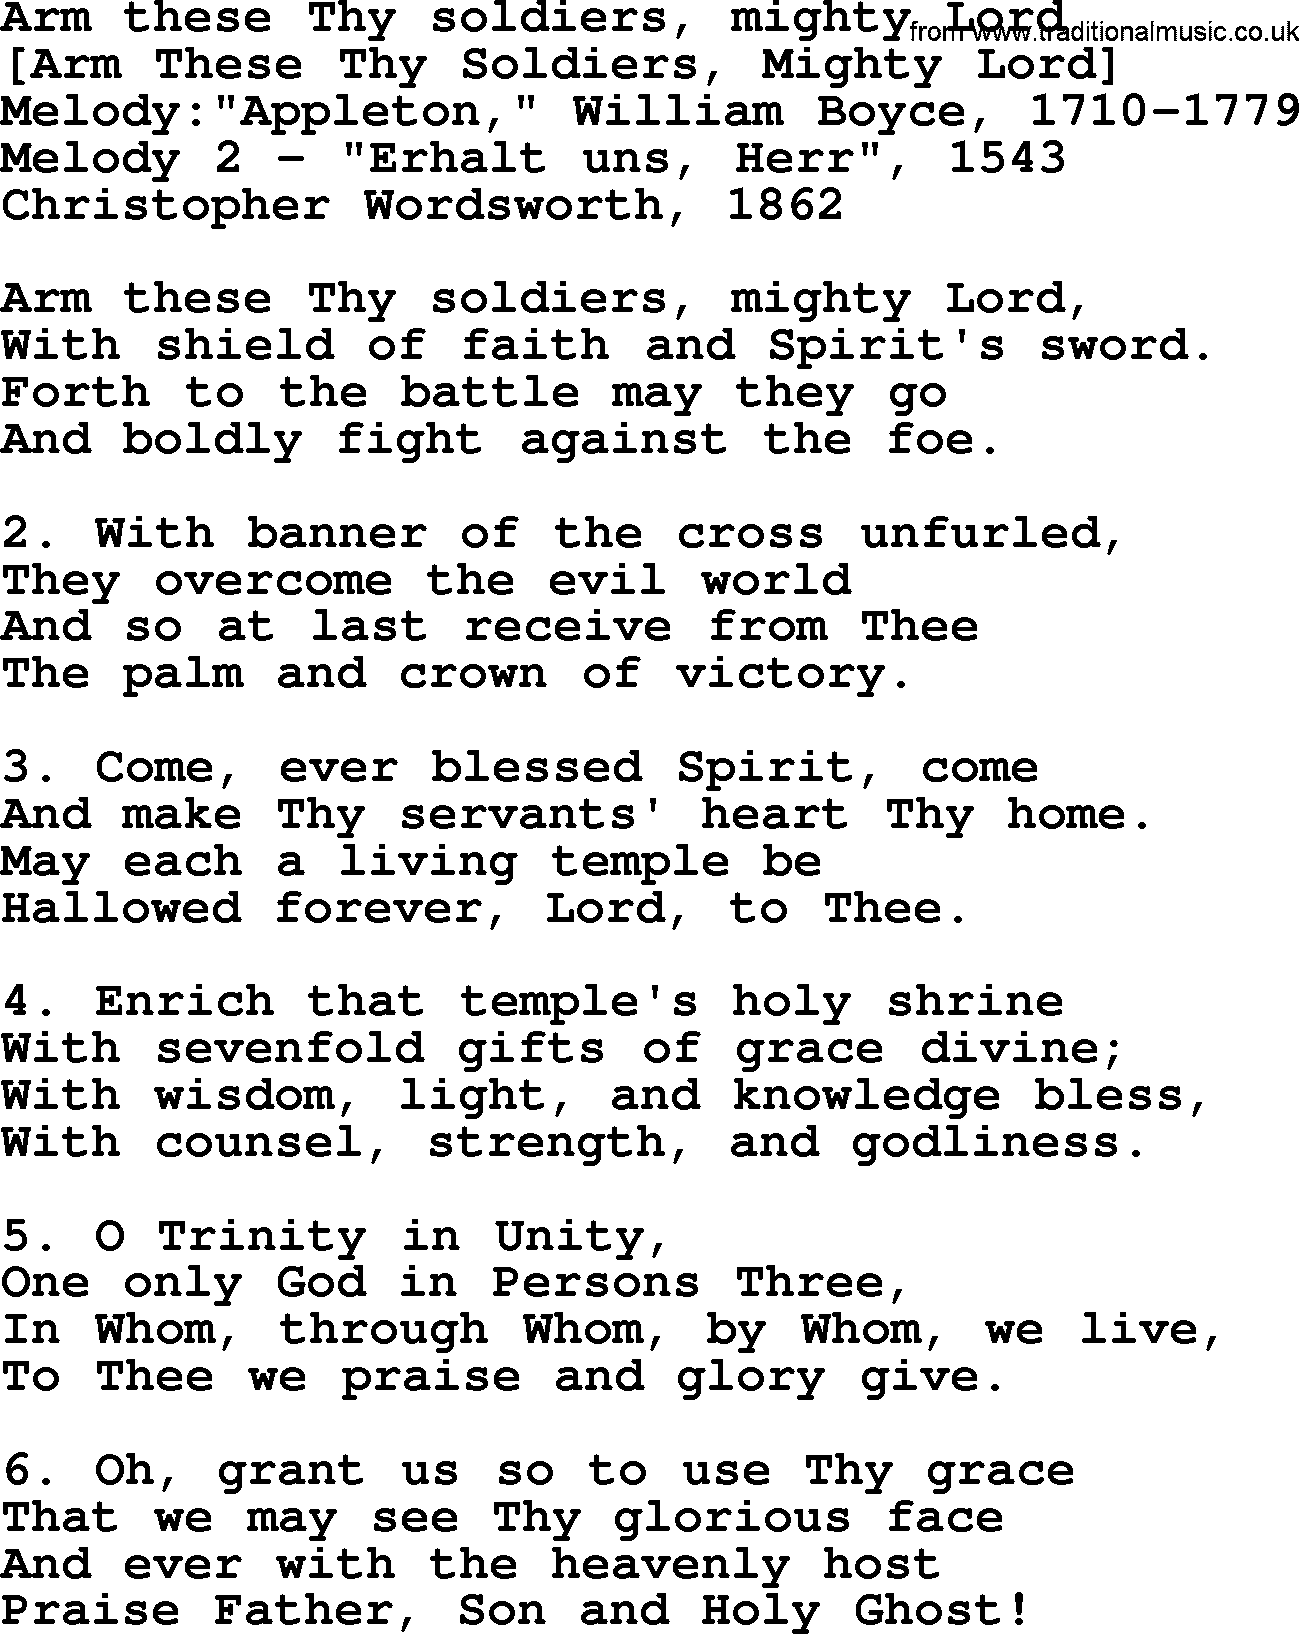 Old English Song: Arm These Thy Soldiers, Mighty Lord lyrics